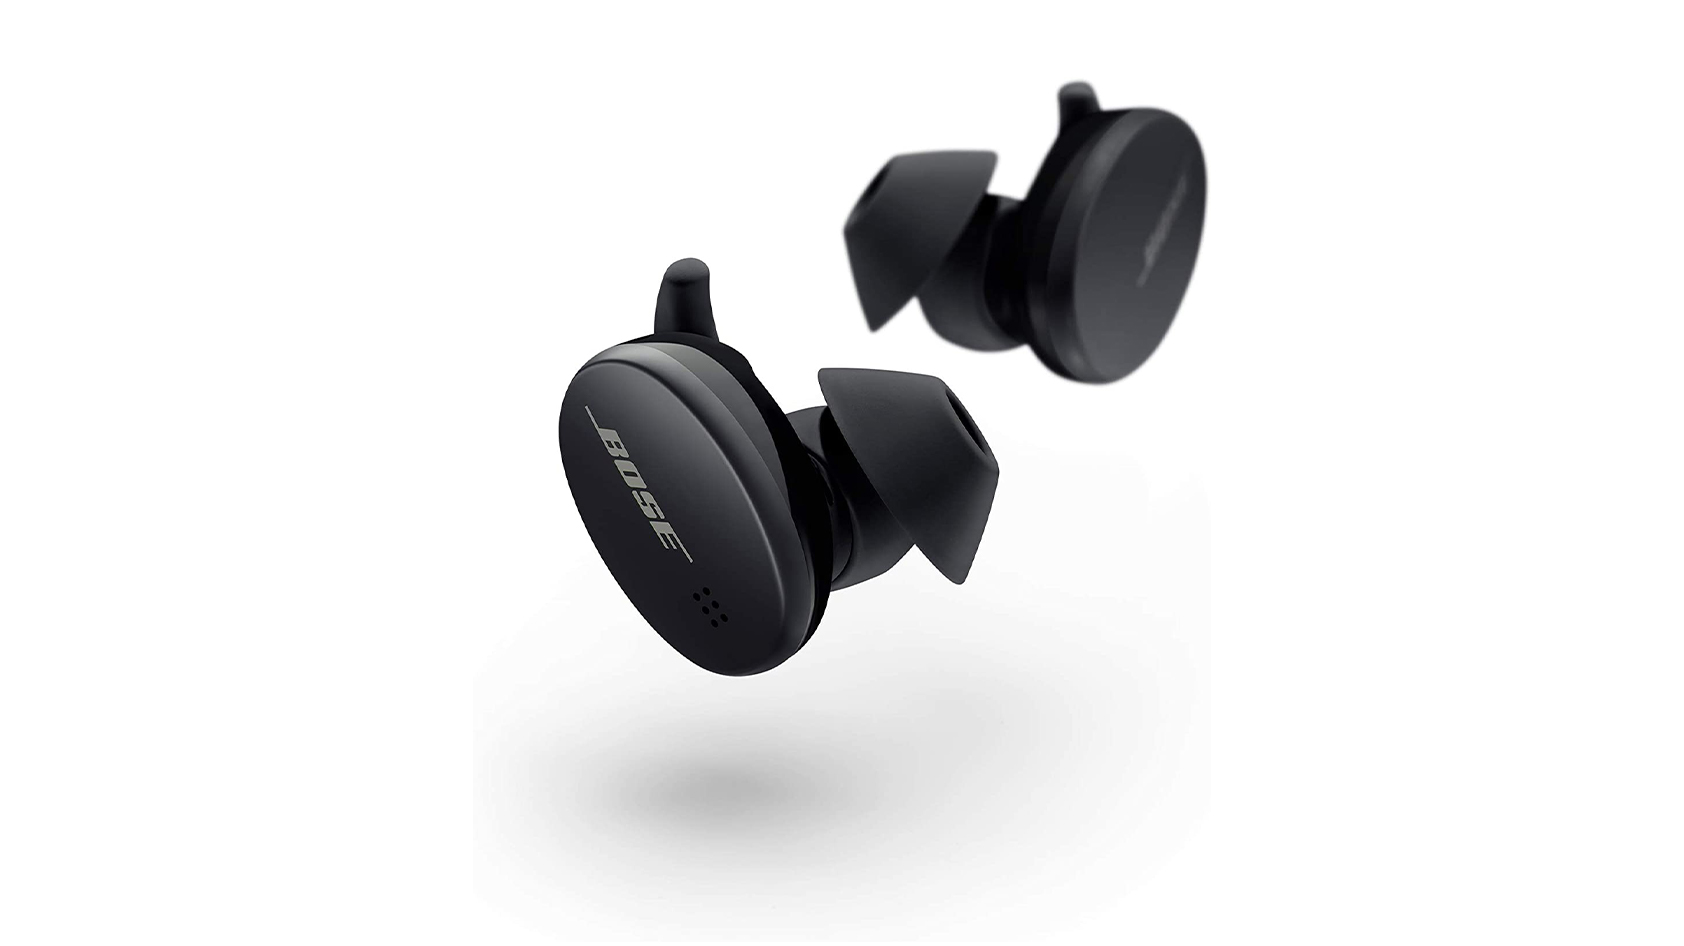 The Bose Sport Earbuds in black against a white background.